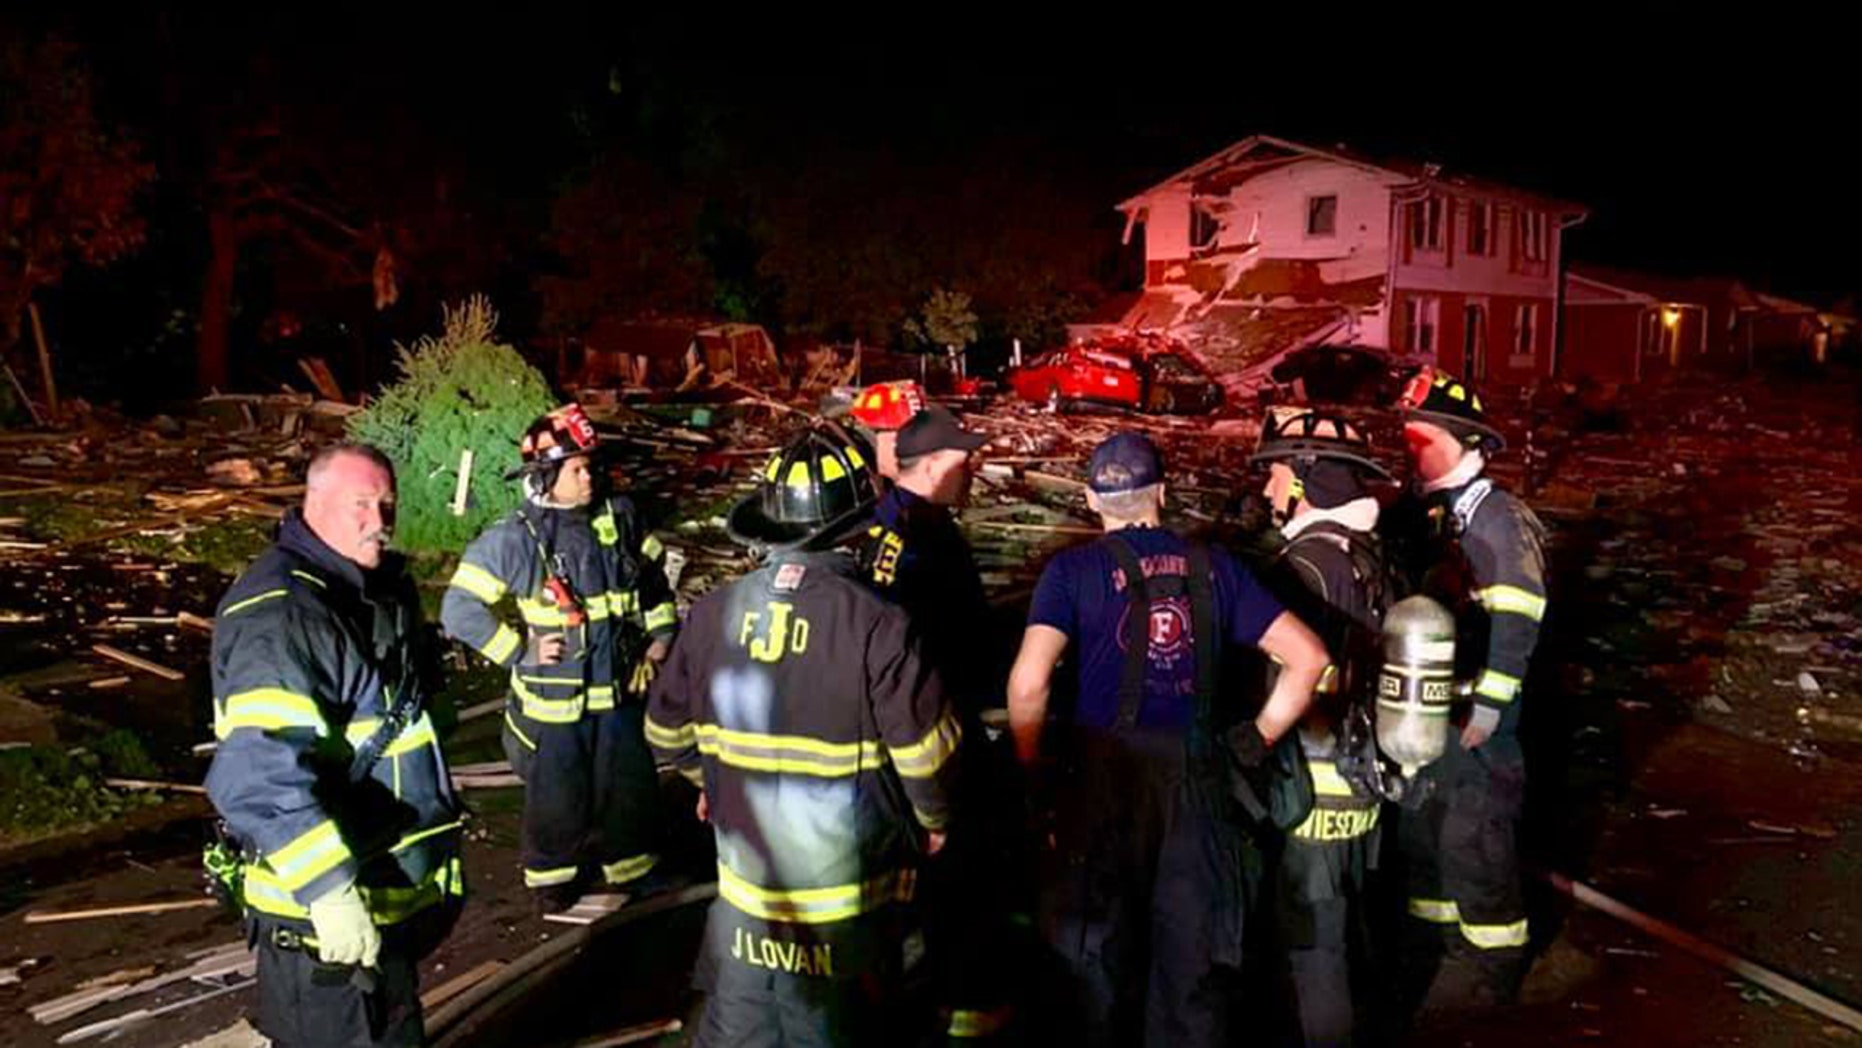 One person died and two others are injured after the explosion of a house in Jeffersonville, Indiana, early Sunday morning